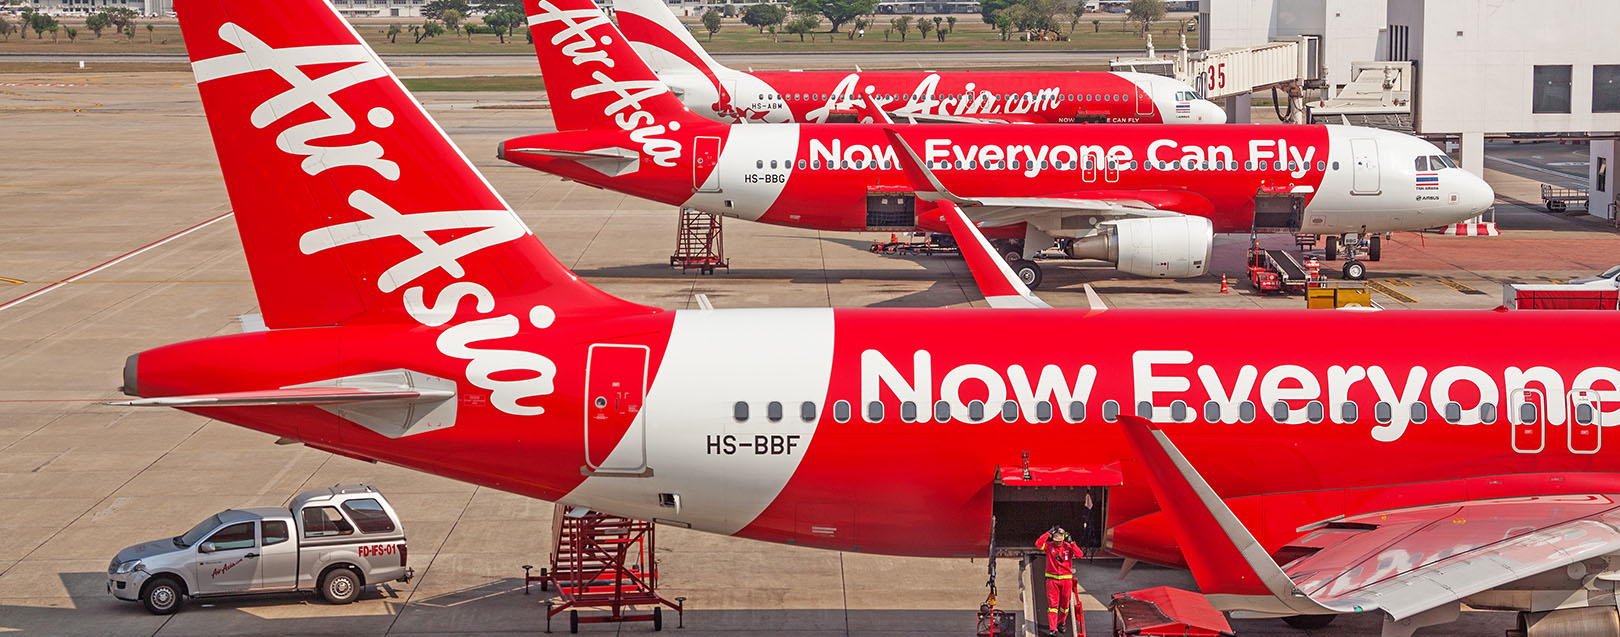 AirAsia India plans to expand to 20 aircraft to fly abroad